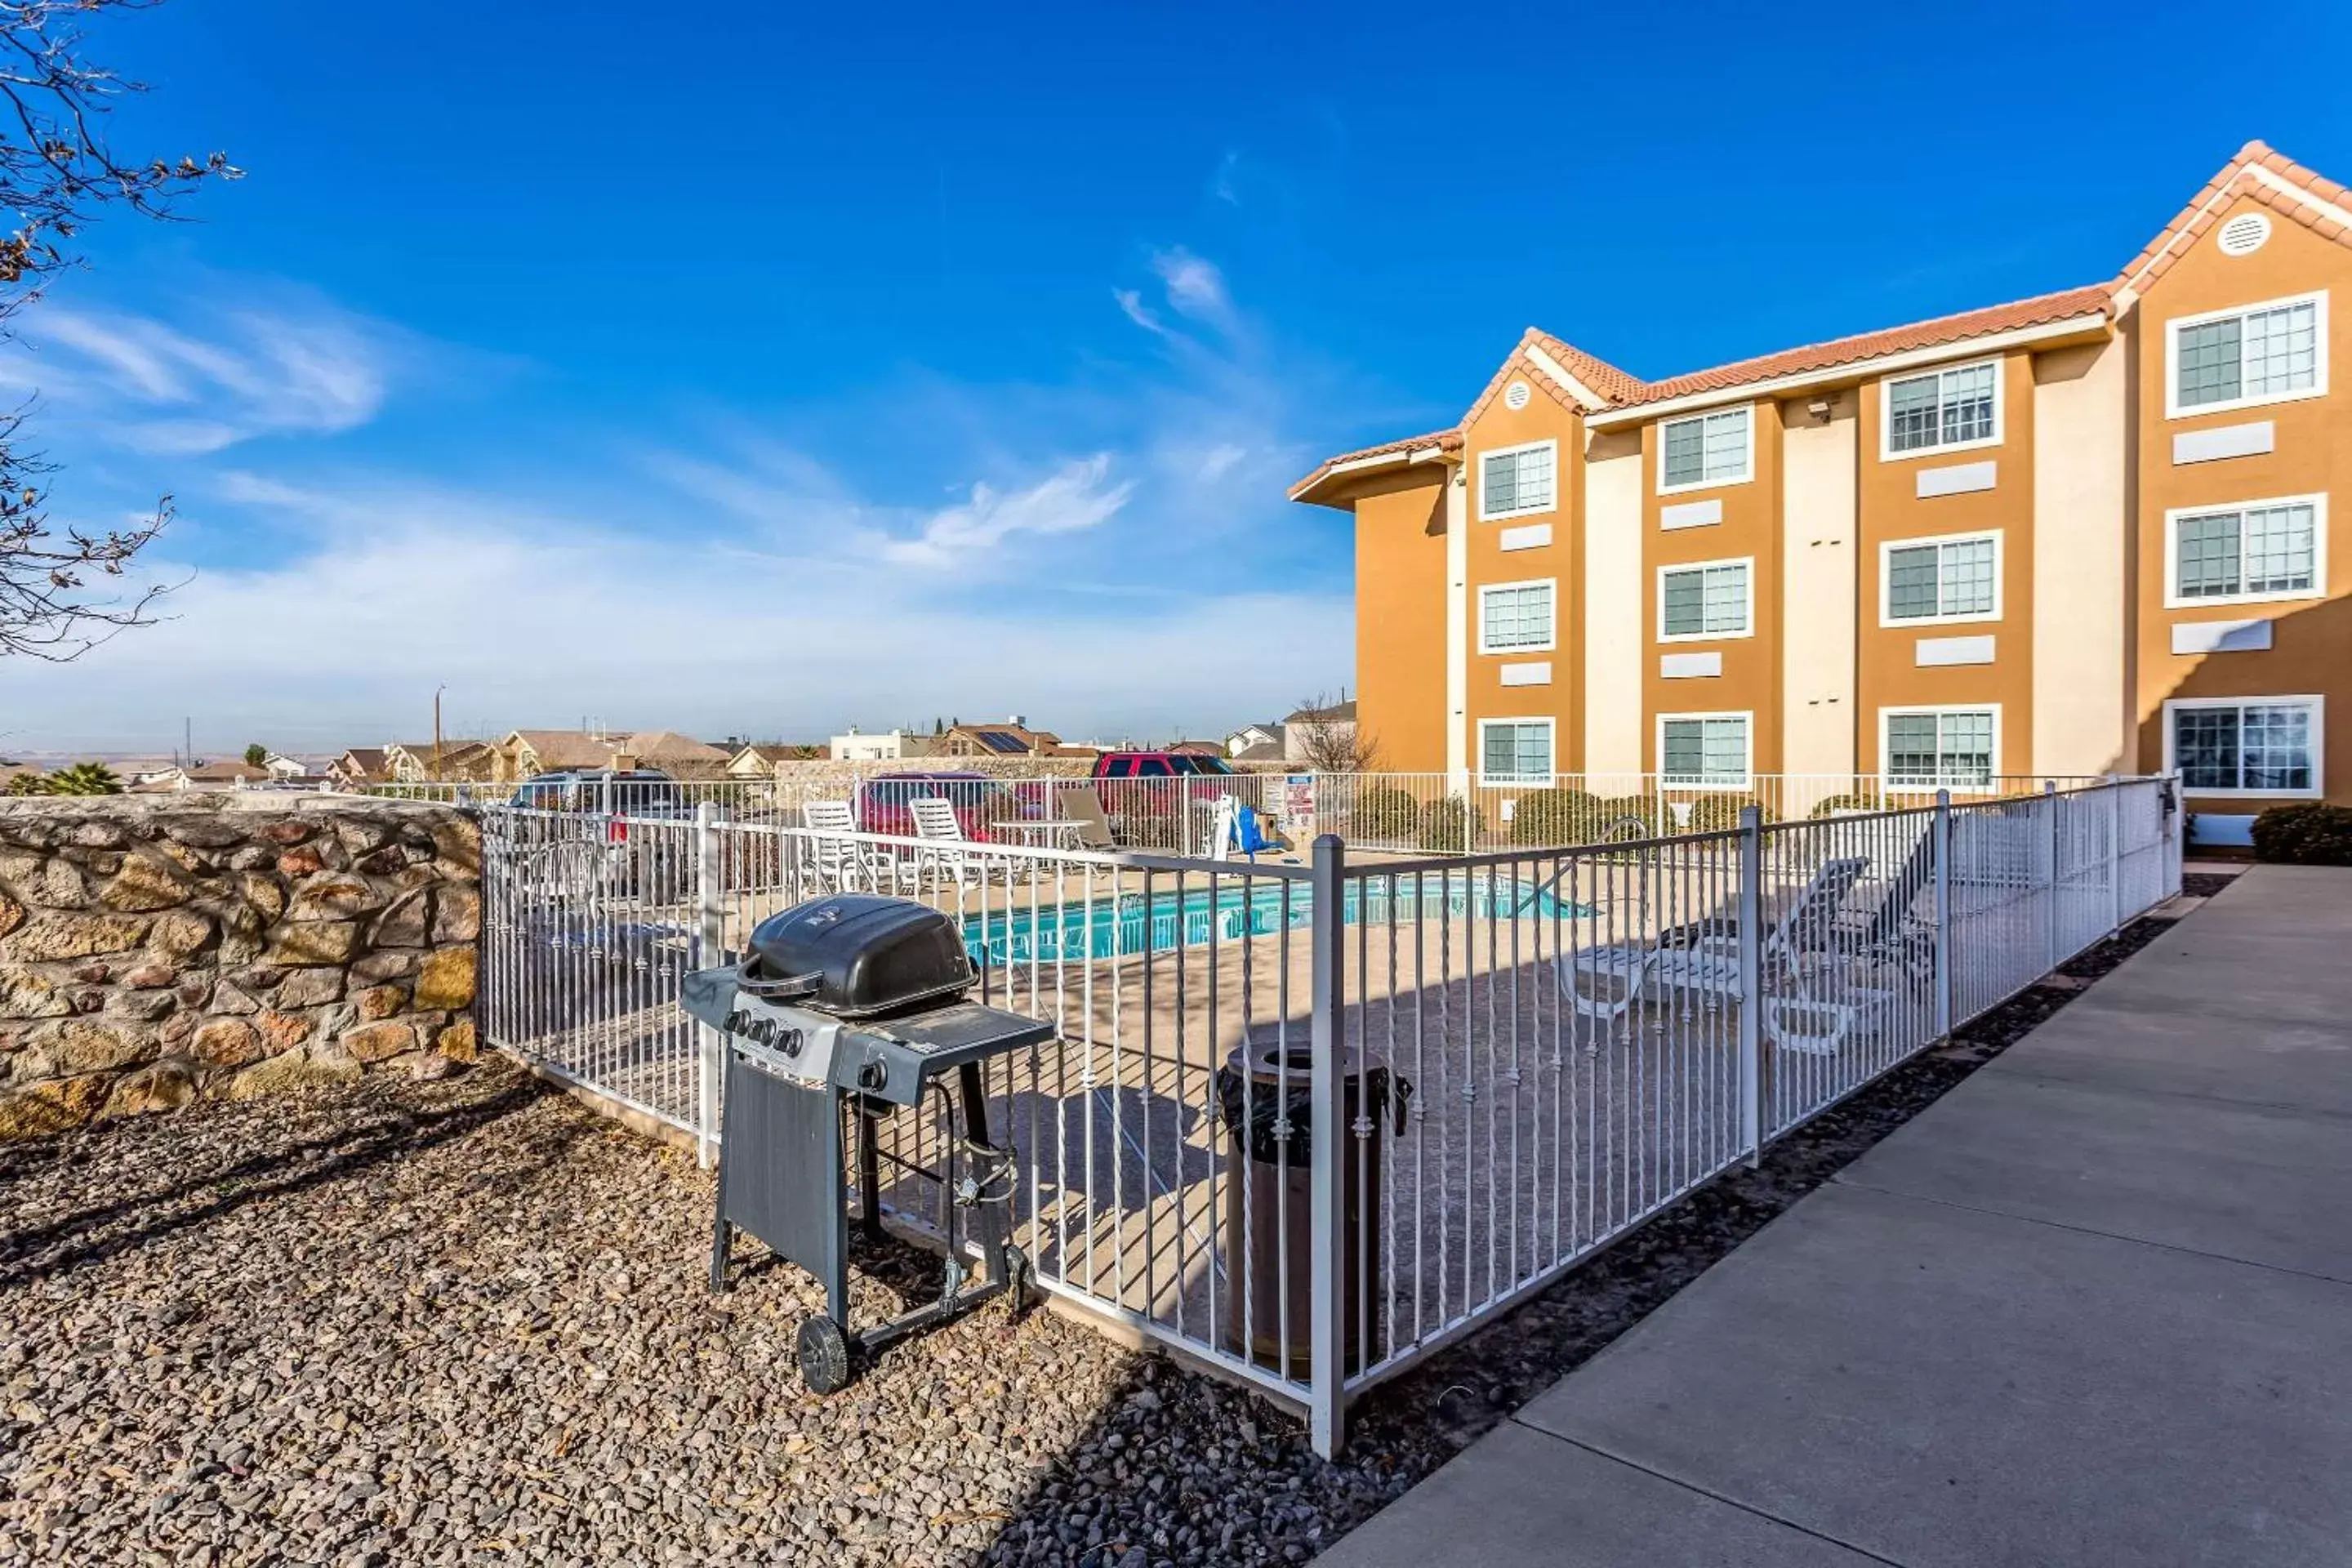 On site in Quality Inn & Suites El Paso I-10